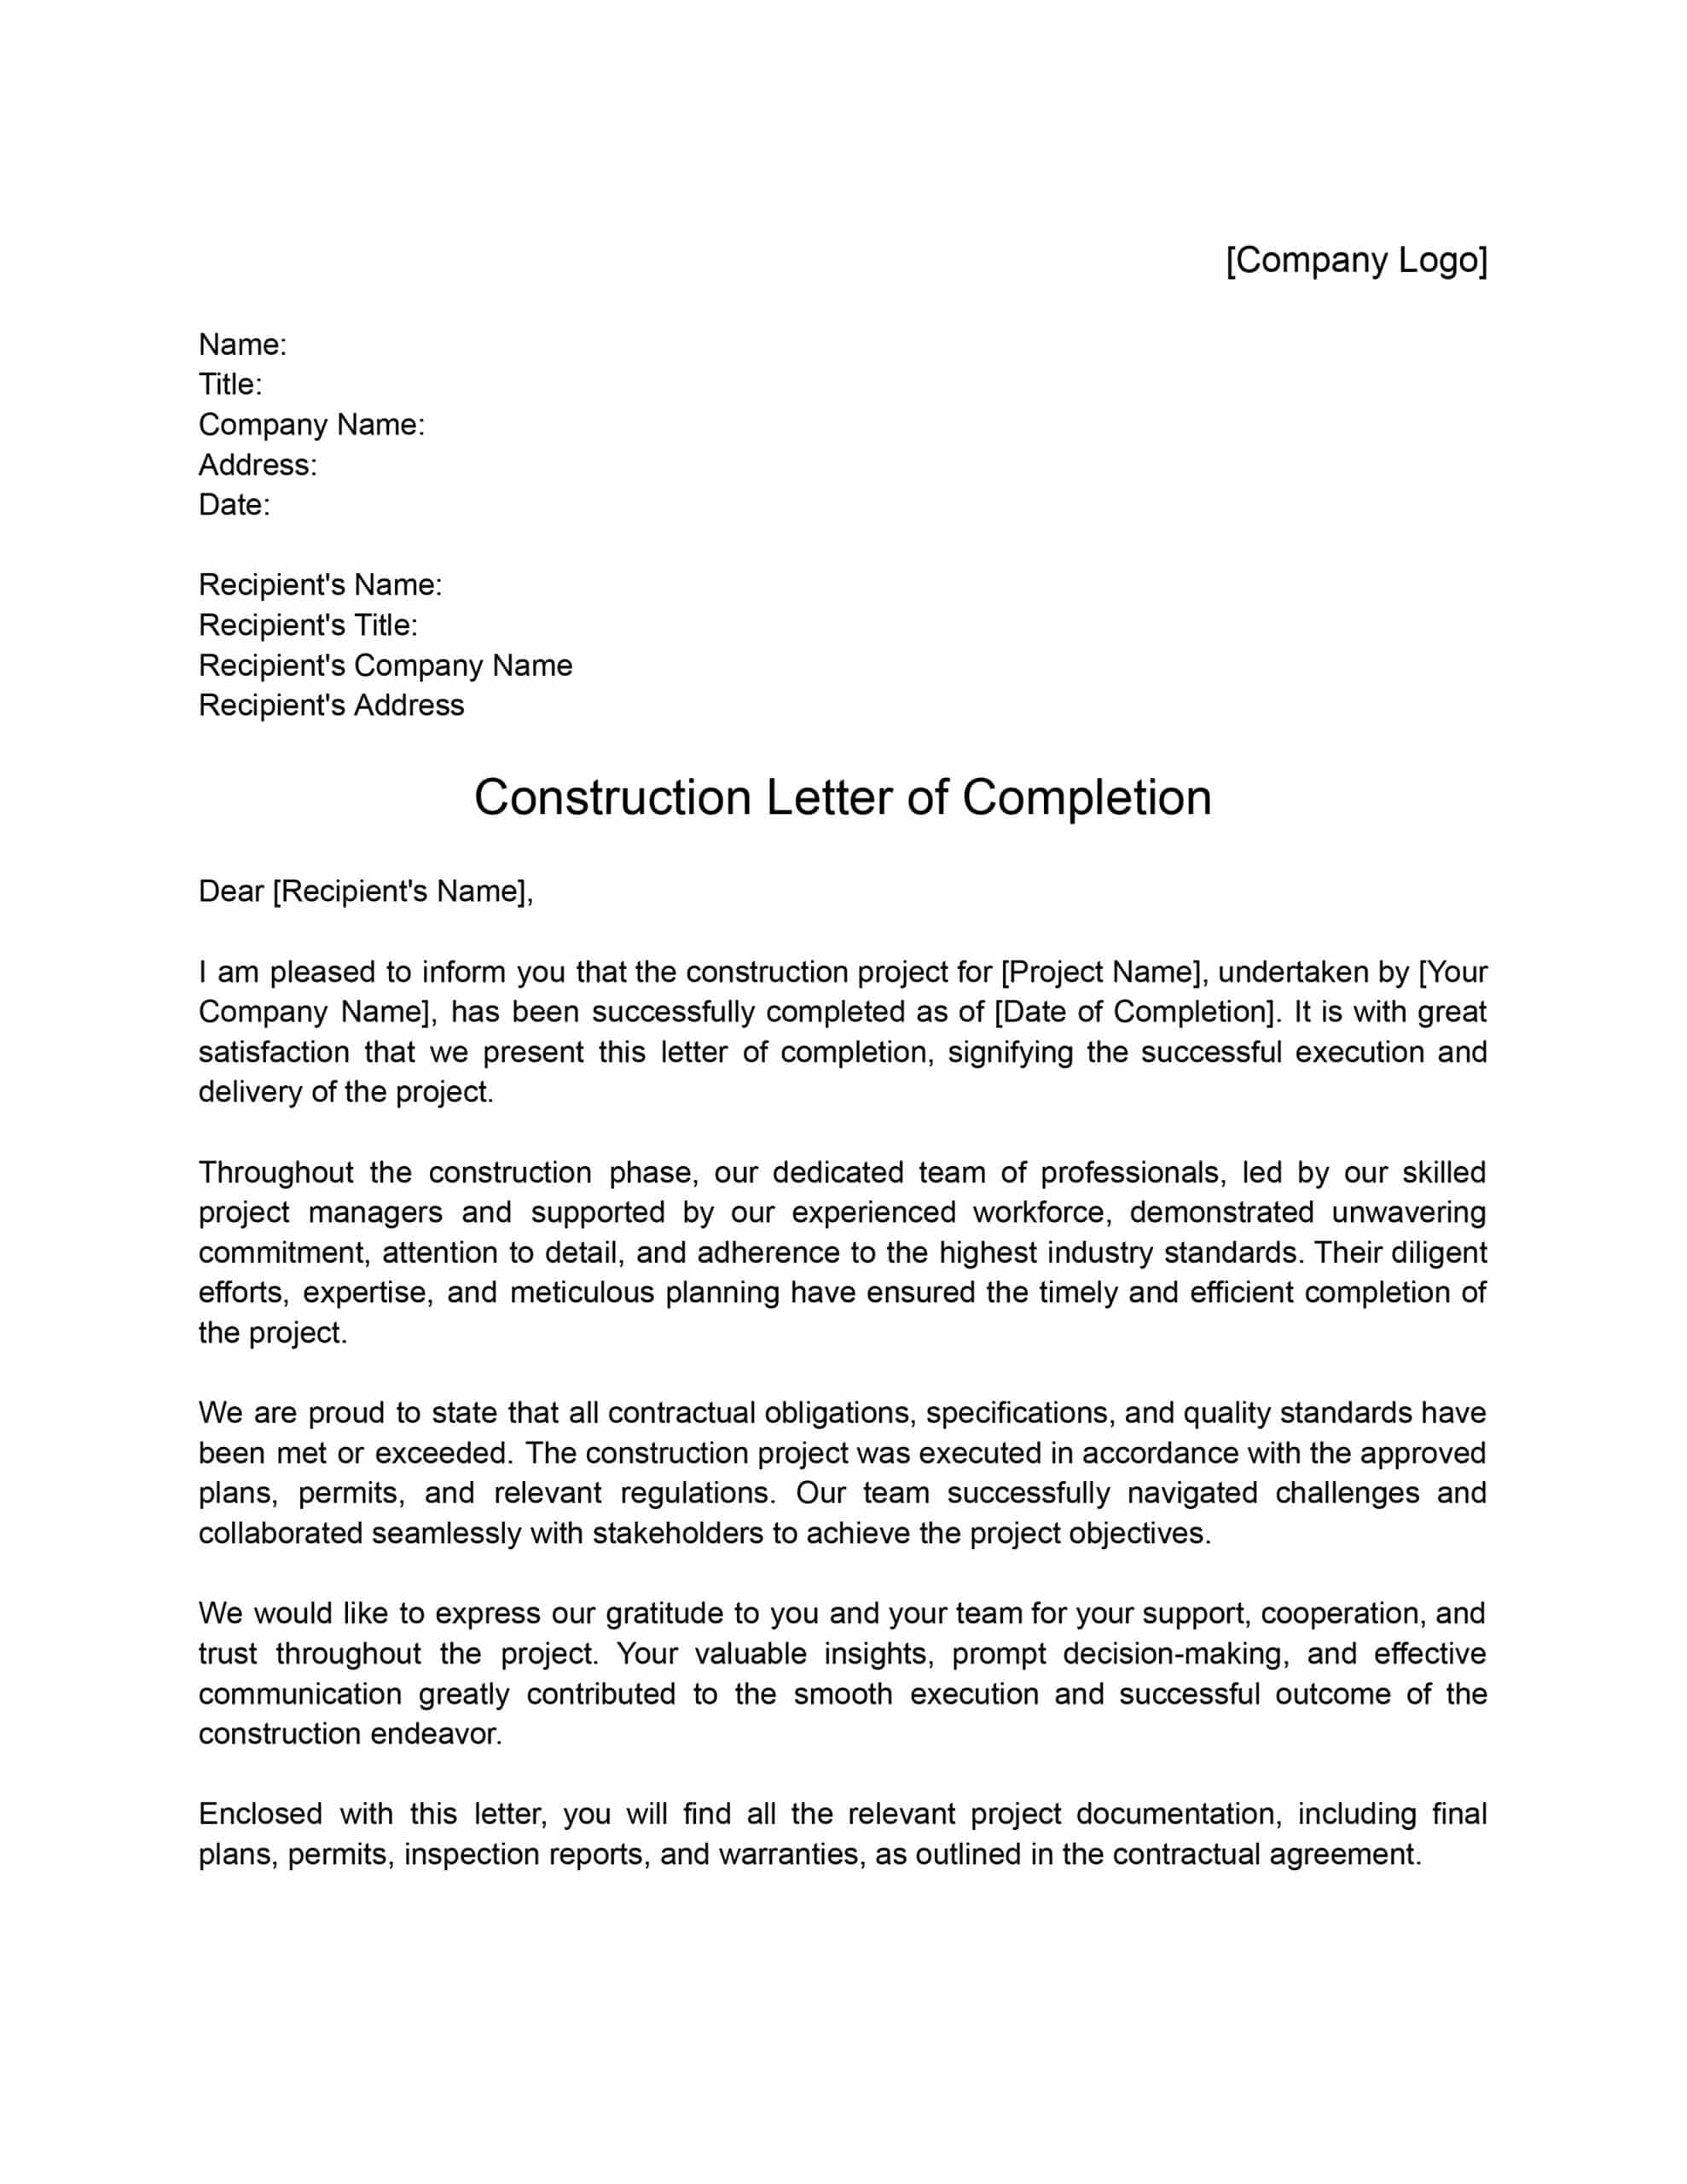 Construction Letter of Completion